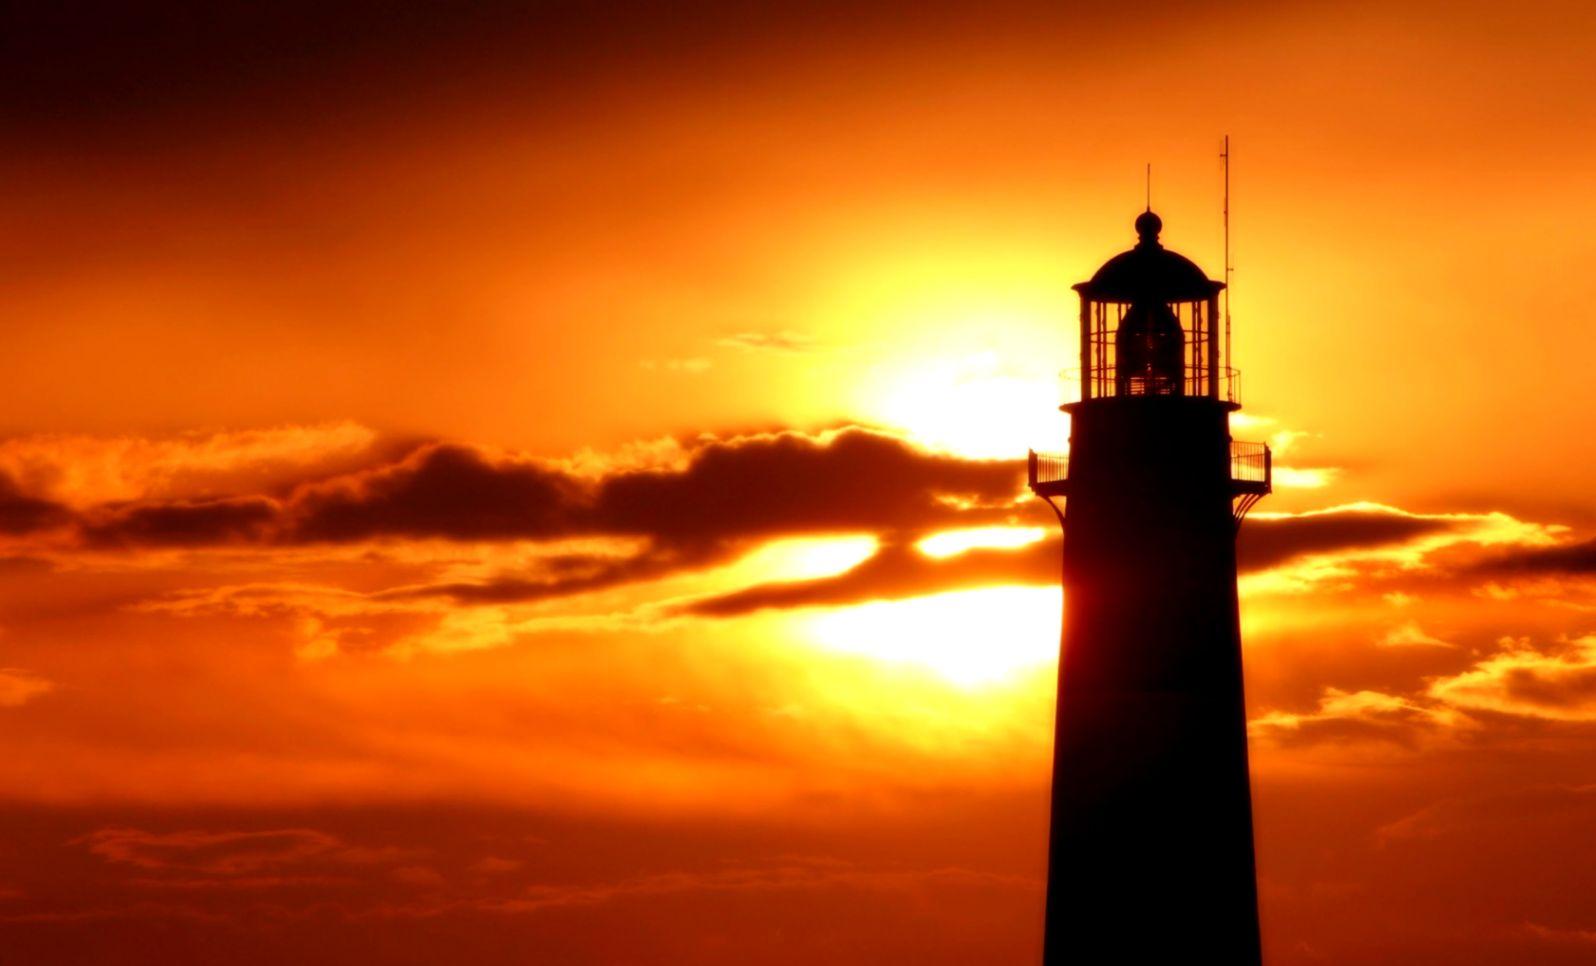 Lighthouse HD Wallpaper Free Download